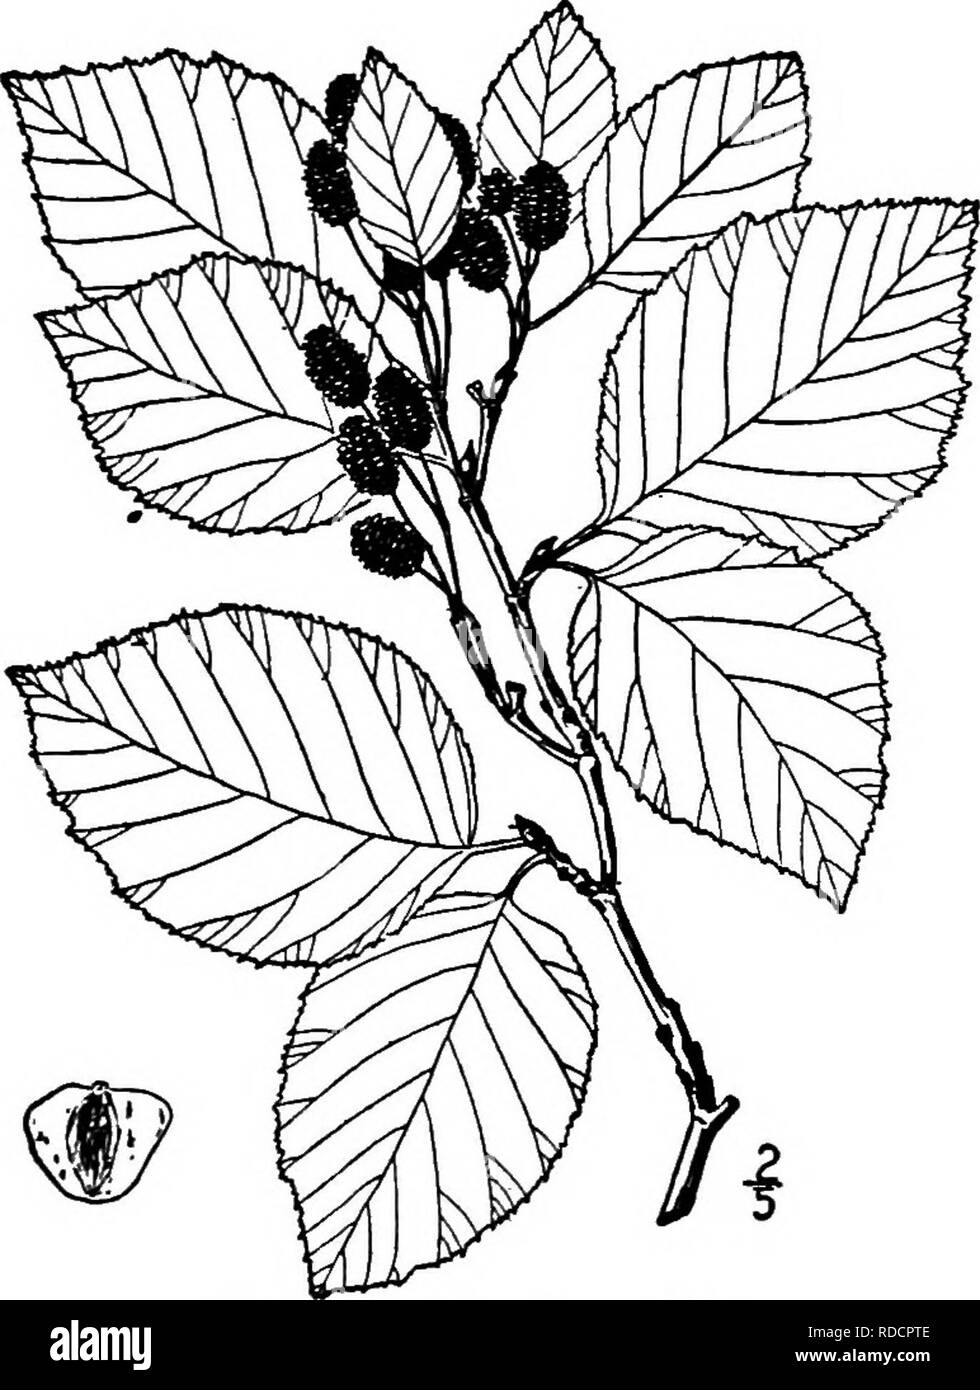 . North American trees : being descriptions and illustrations of the trees growing independently of cultivation in North America, north of Mexico and the West Indies . Trees. 26o The Alders Trees or shrubs flowering in early spring. Nut bordered by a broad membranous wing on each margin. Nut acutely margined or narrowly winged. Foliage not glutinous when mature; native species. Leaves prevailingly obovate; eastern shrub or small tree. Leaves ovate, oval or ovate-lanceolate; seldom obovate. Leaves mostly brown-pubescent beneath, at least upon the veins; Padfic coast tree; stamens 4; staminate c Stock Photo